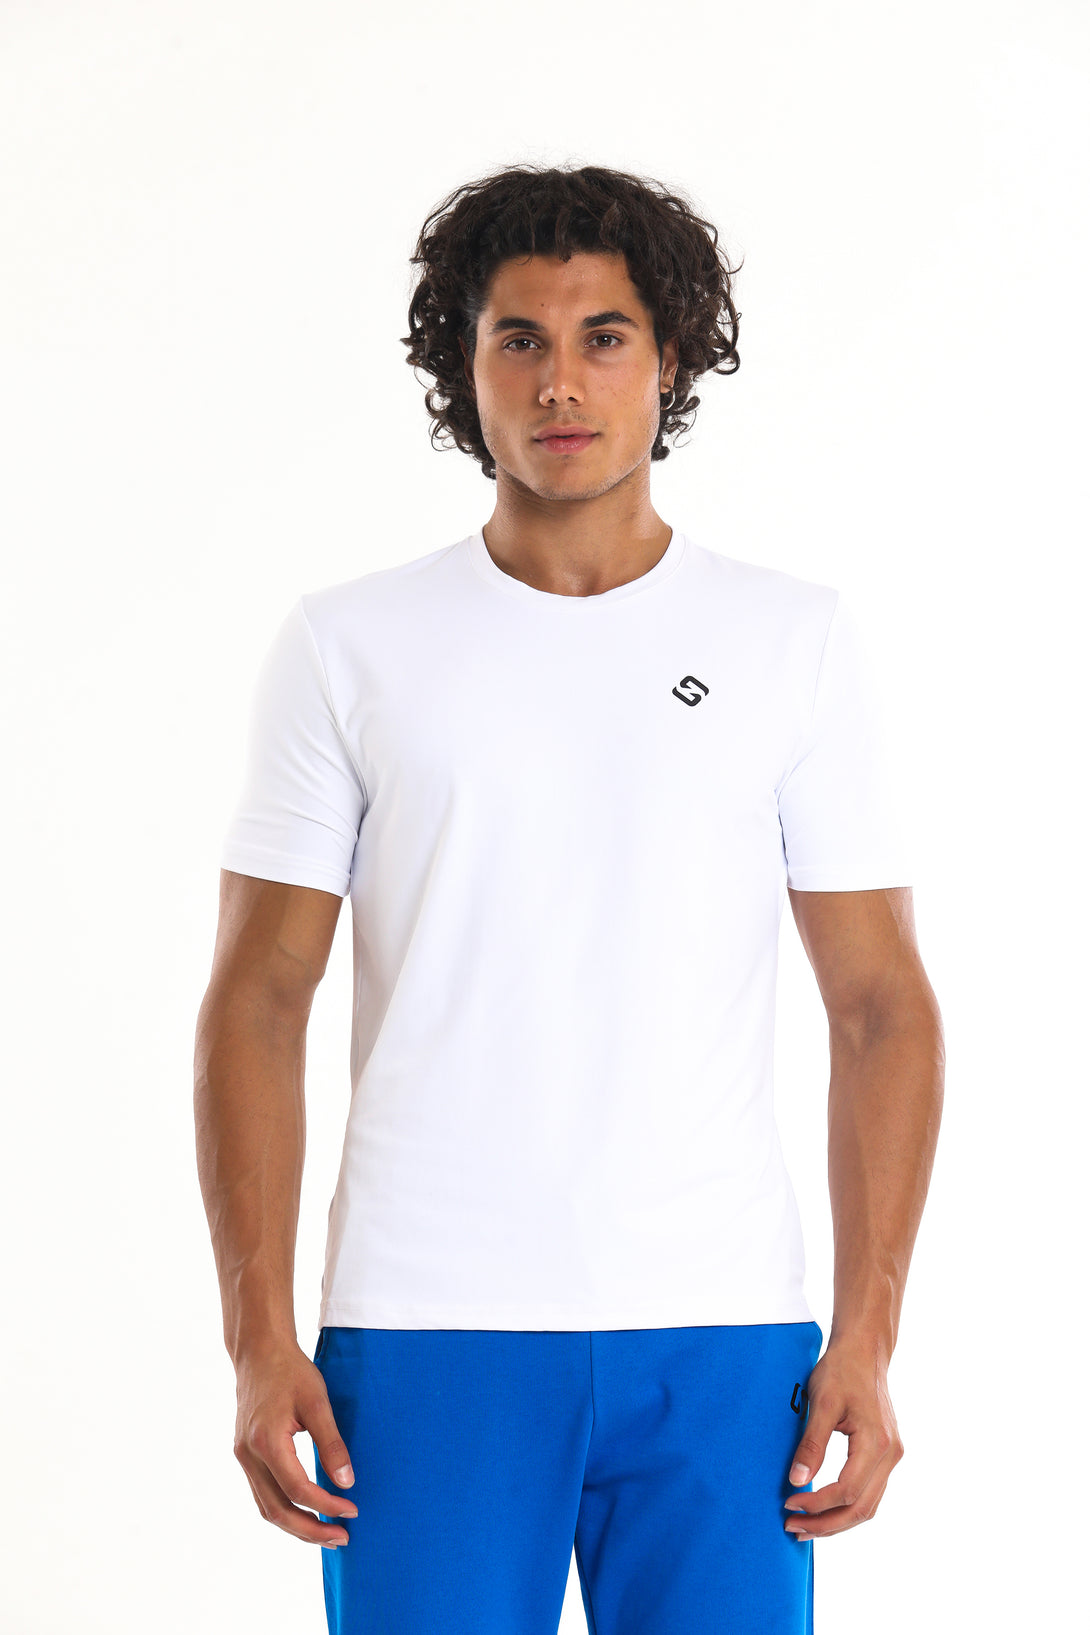 A Man Wearing White Color Essential Workout T-Shirt